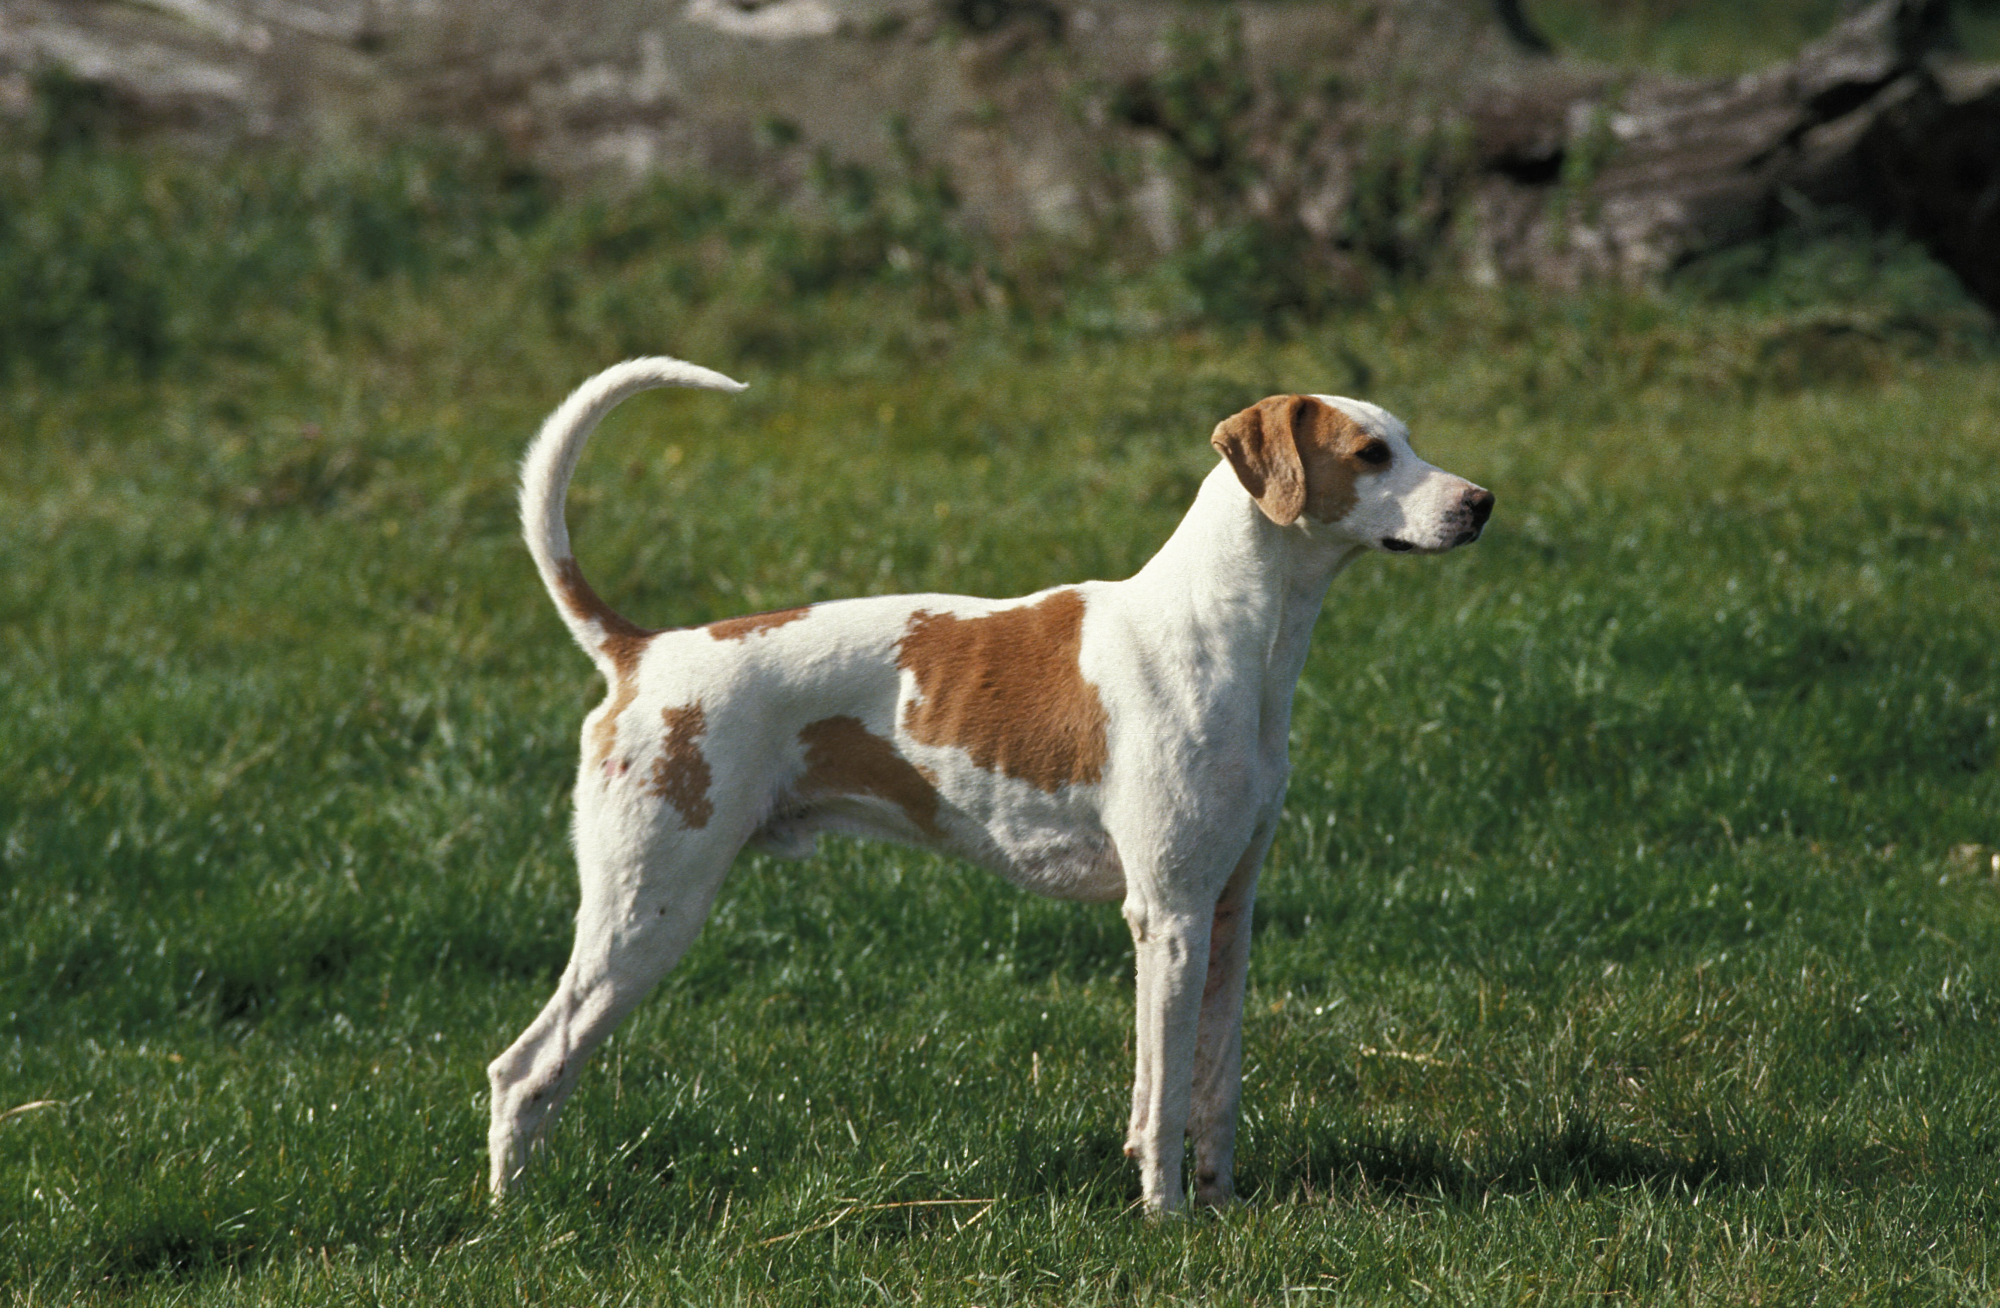 Great Angle Francais White and Orange Hound standing alert on grass